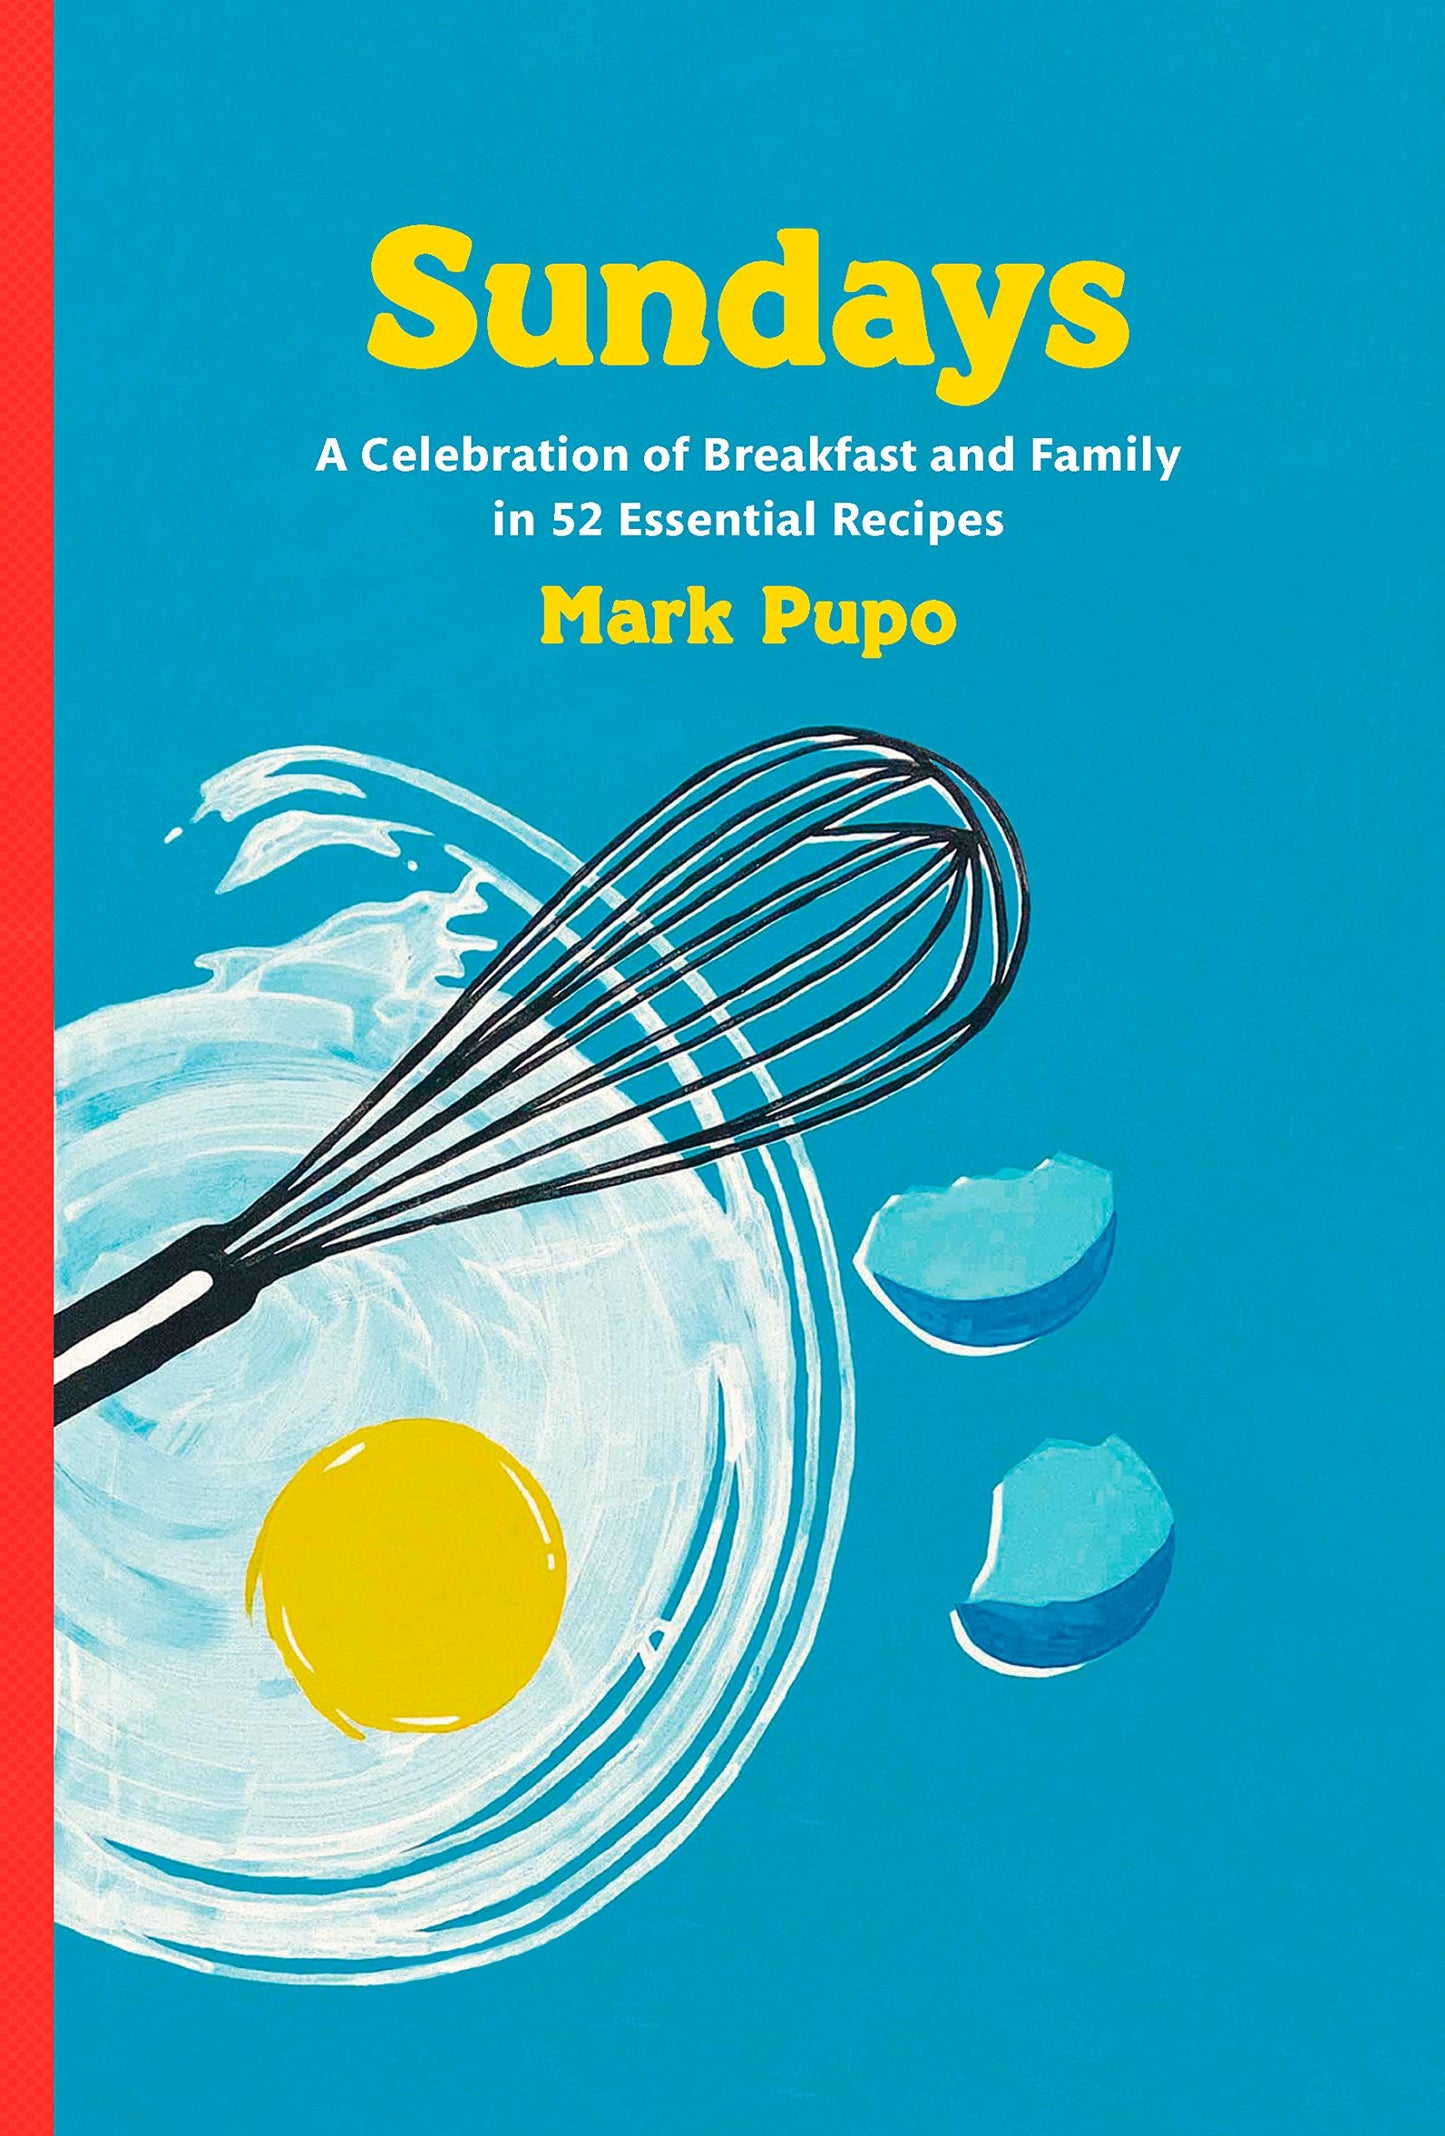 Sundays: A Celebration of Breakfast and Family in 52 Essential Recipes